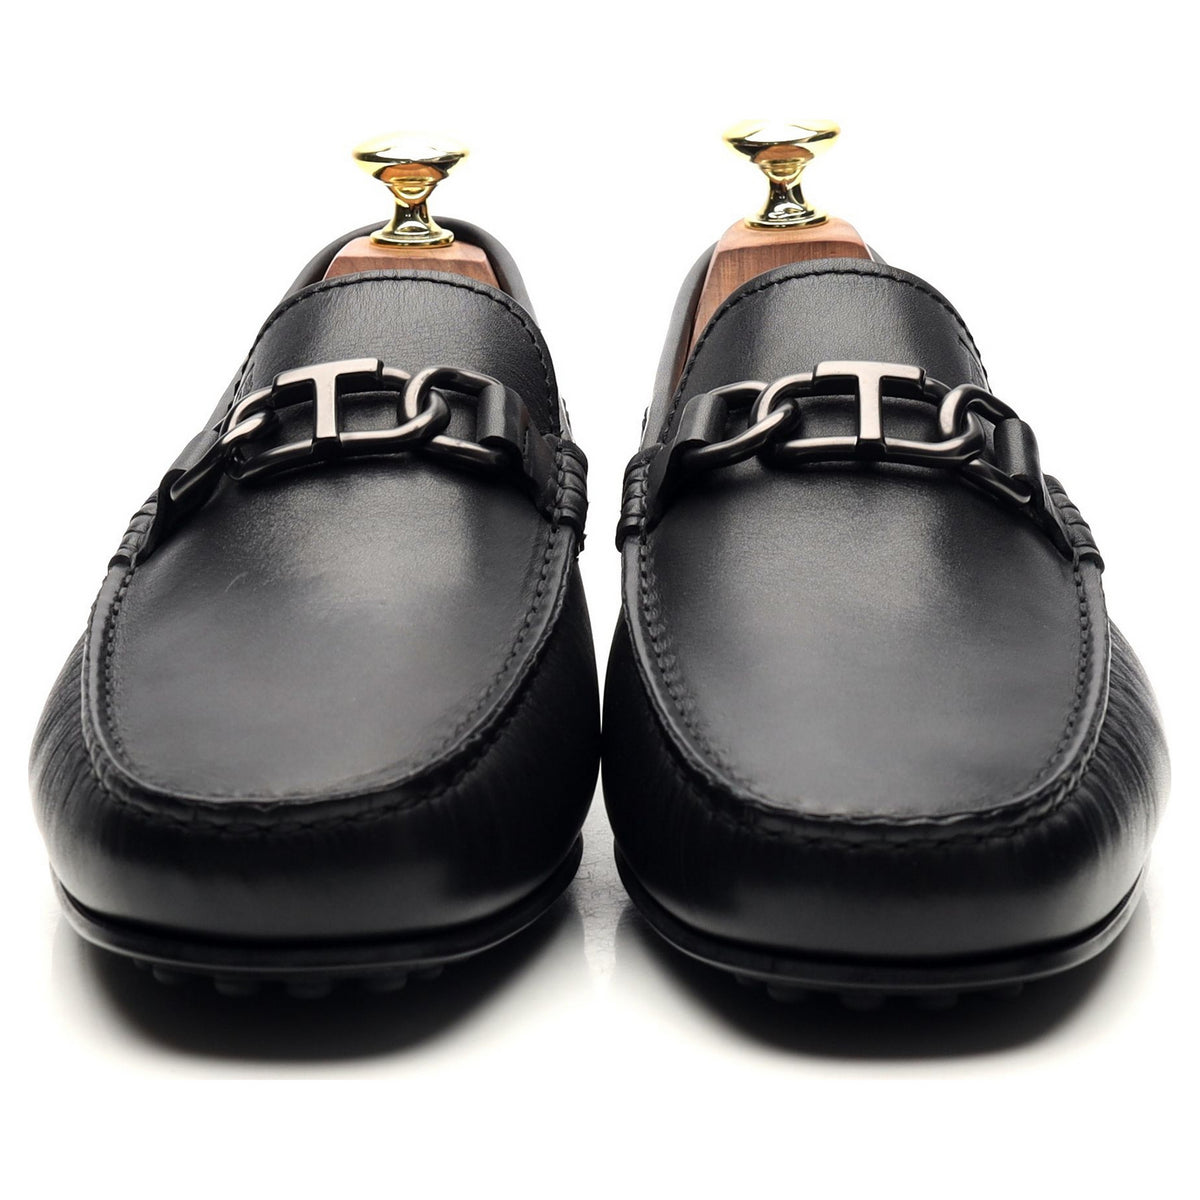 Gommino Black Leather Driving Loafers UK 7